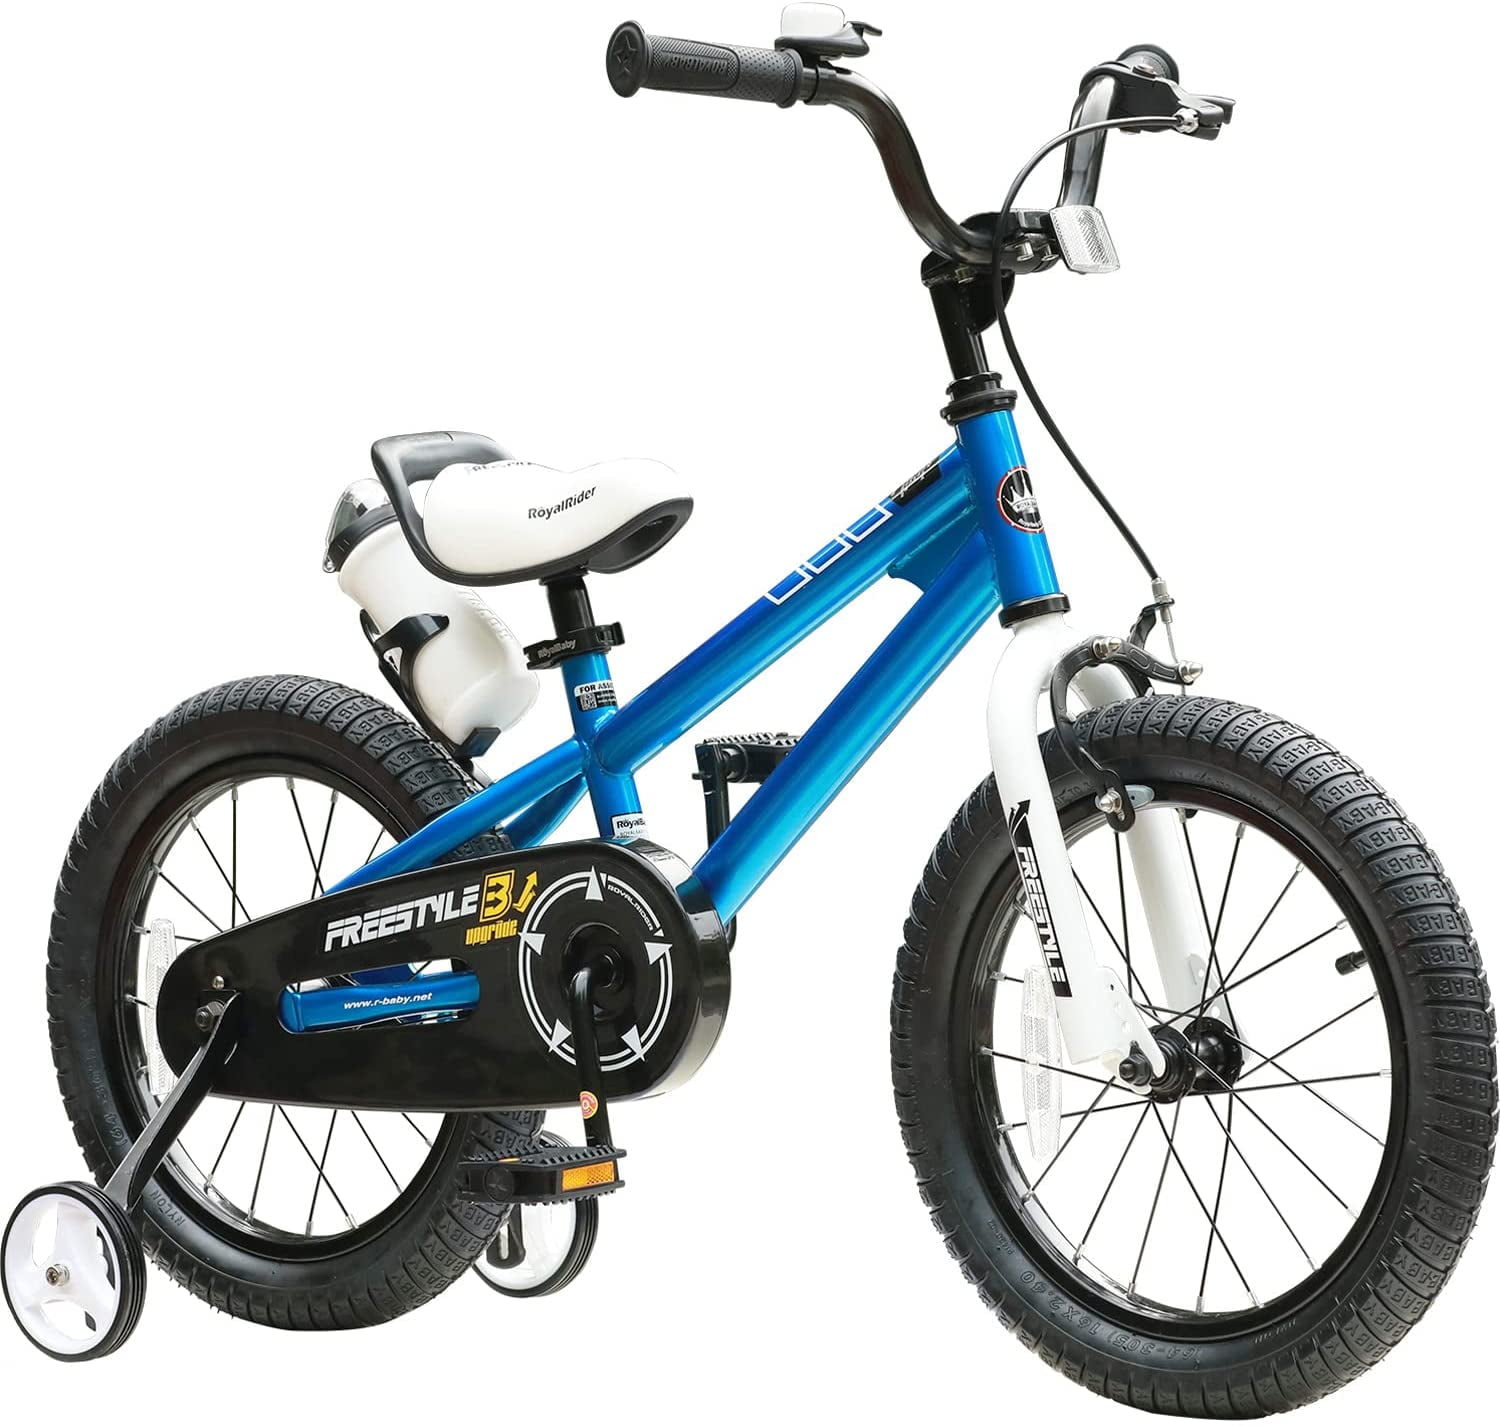 Toddler Baby Kids Bike Boys Girls Freestyle Bicycle 16 Inch with Training Wheels 